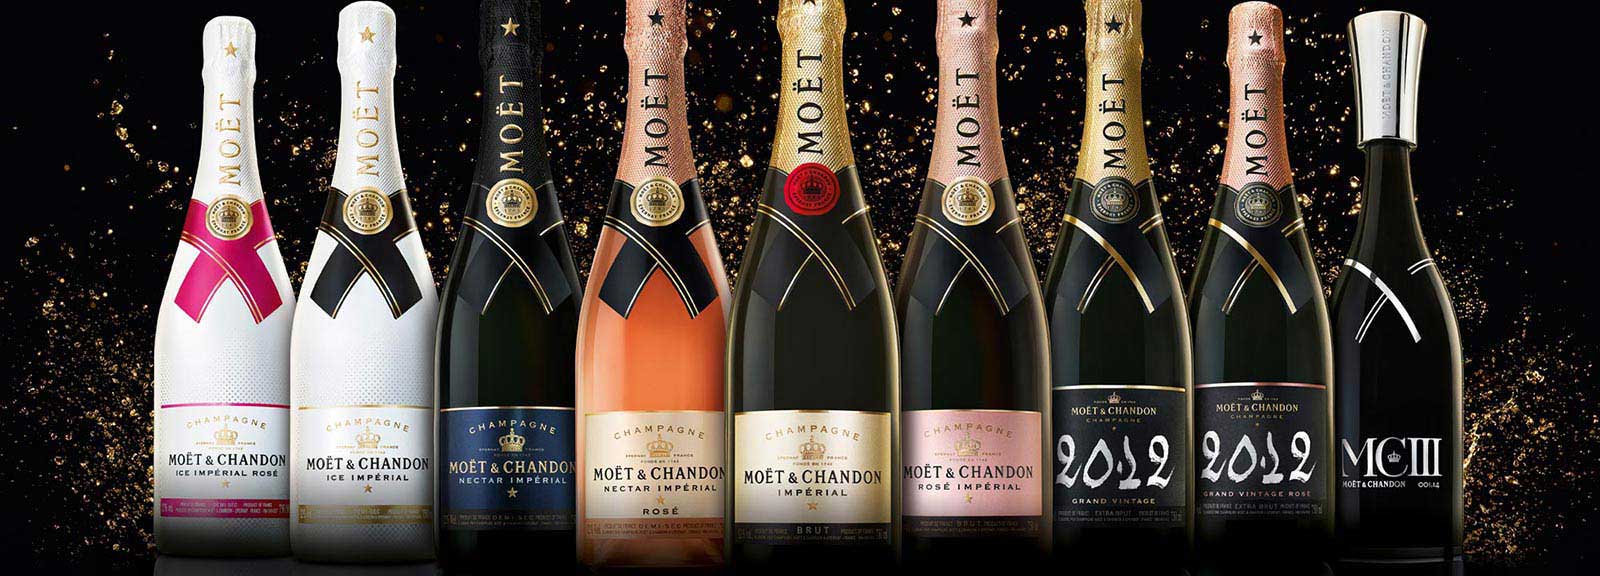 Buy MOET & CHANDON NECTAR IMPERIAL ROSE CHAMPAGNE FRANCE 187ML